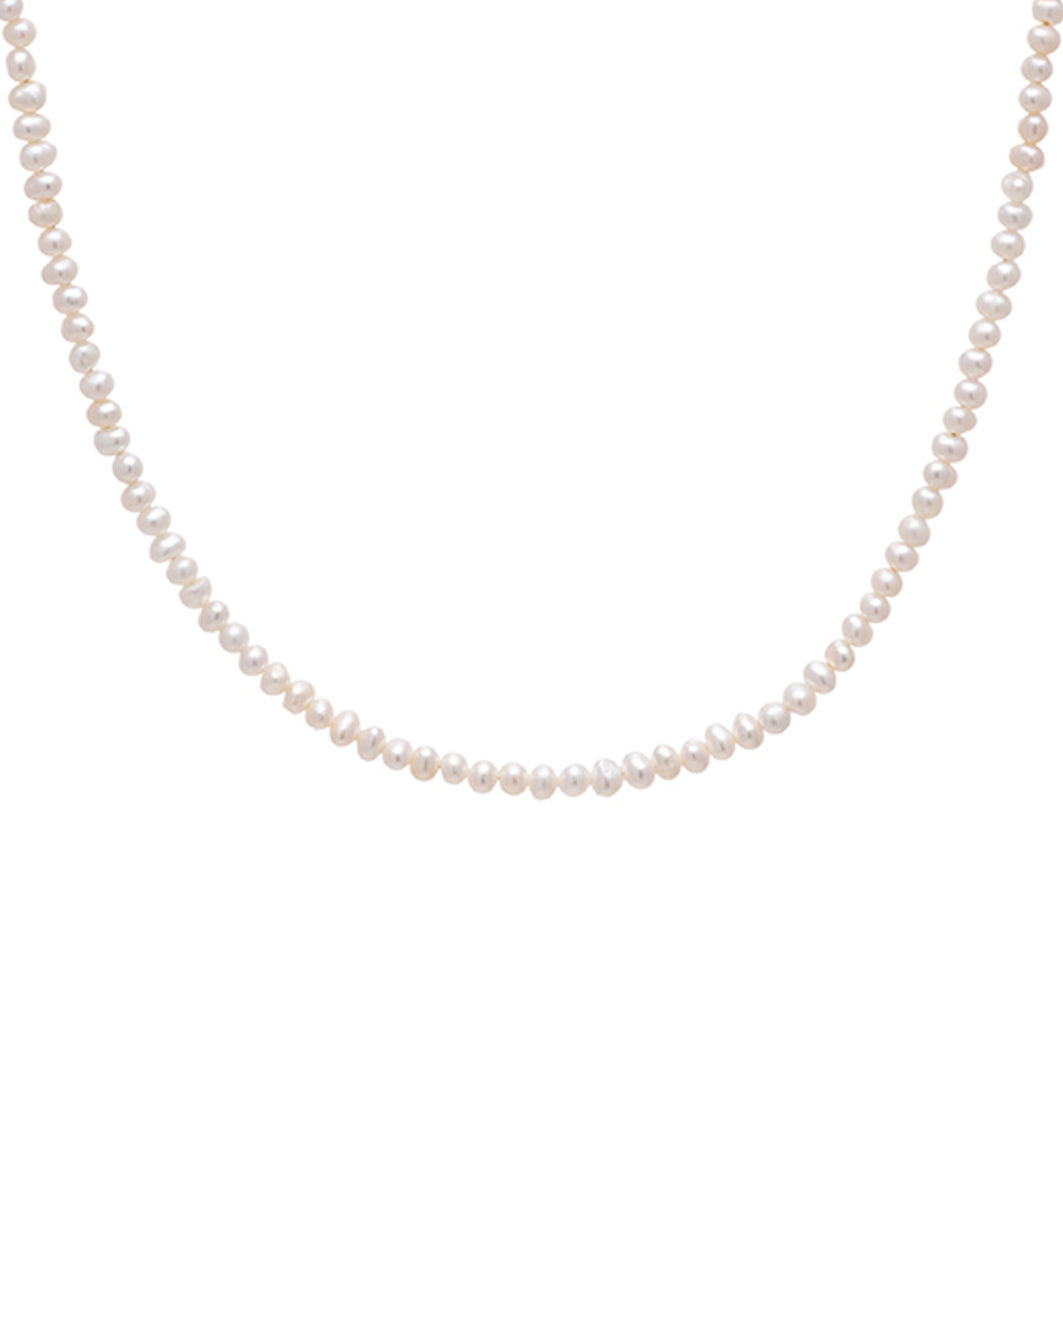 Pearl S necklace